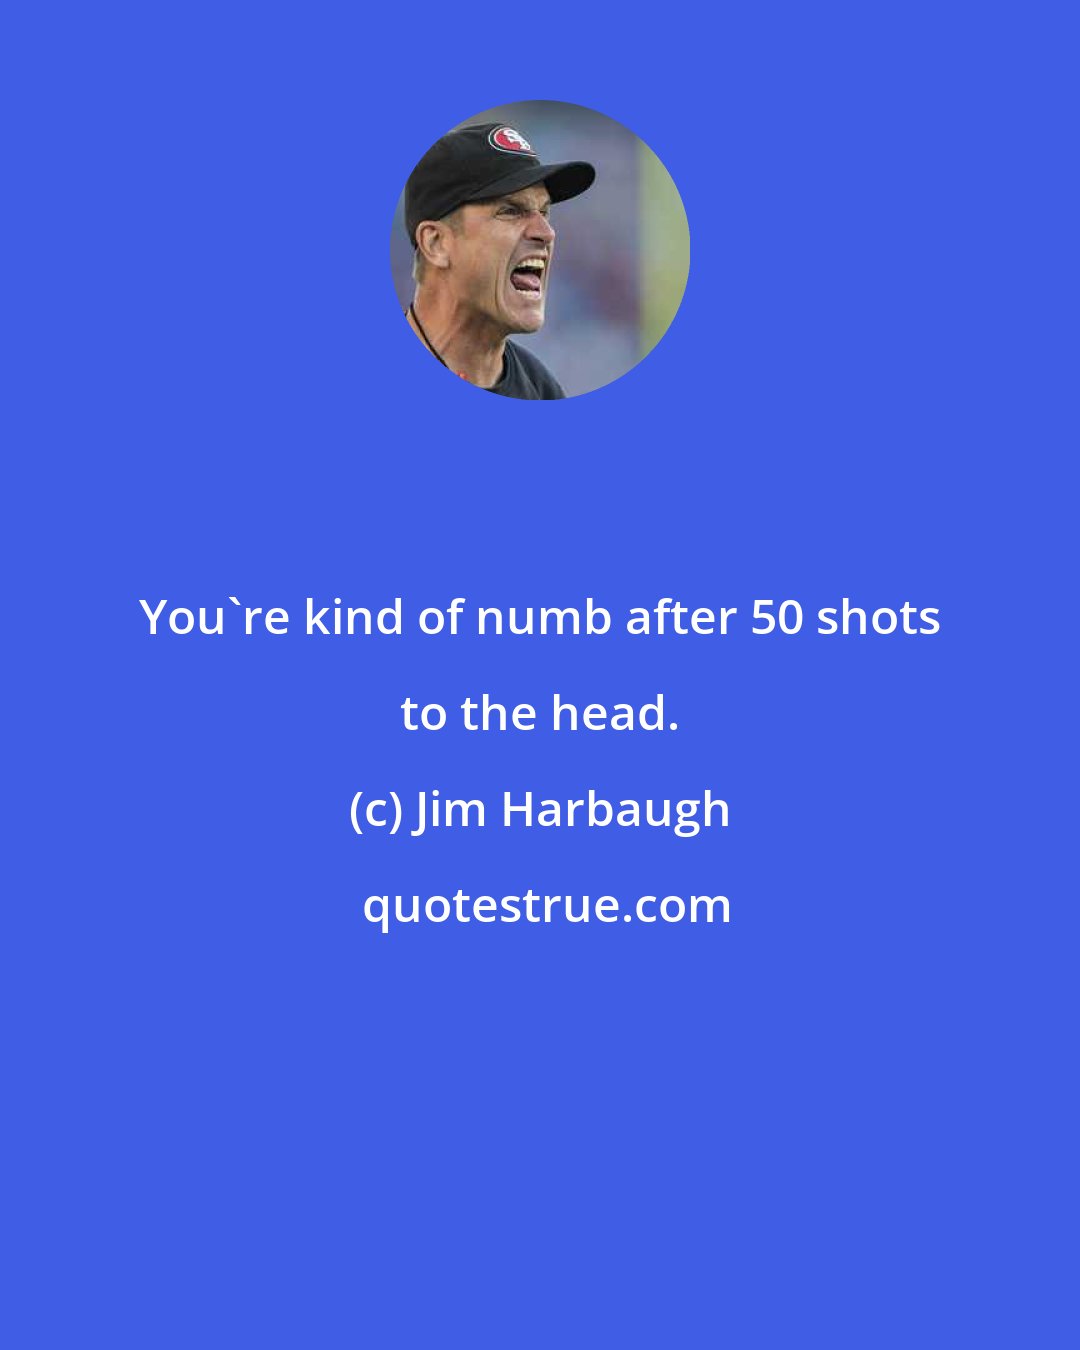 Jim Harbaugh: You're kind of numb after 50 shots to the head.